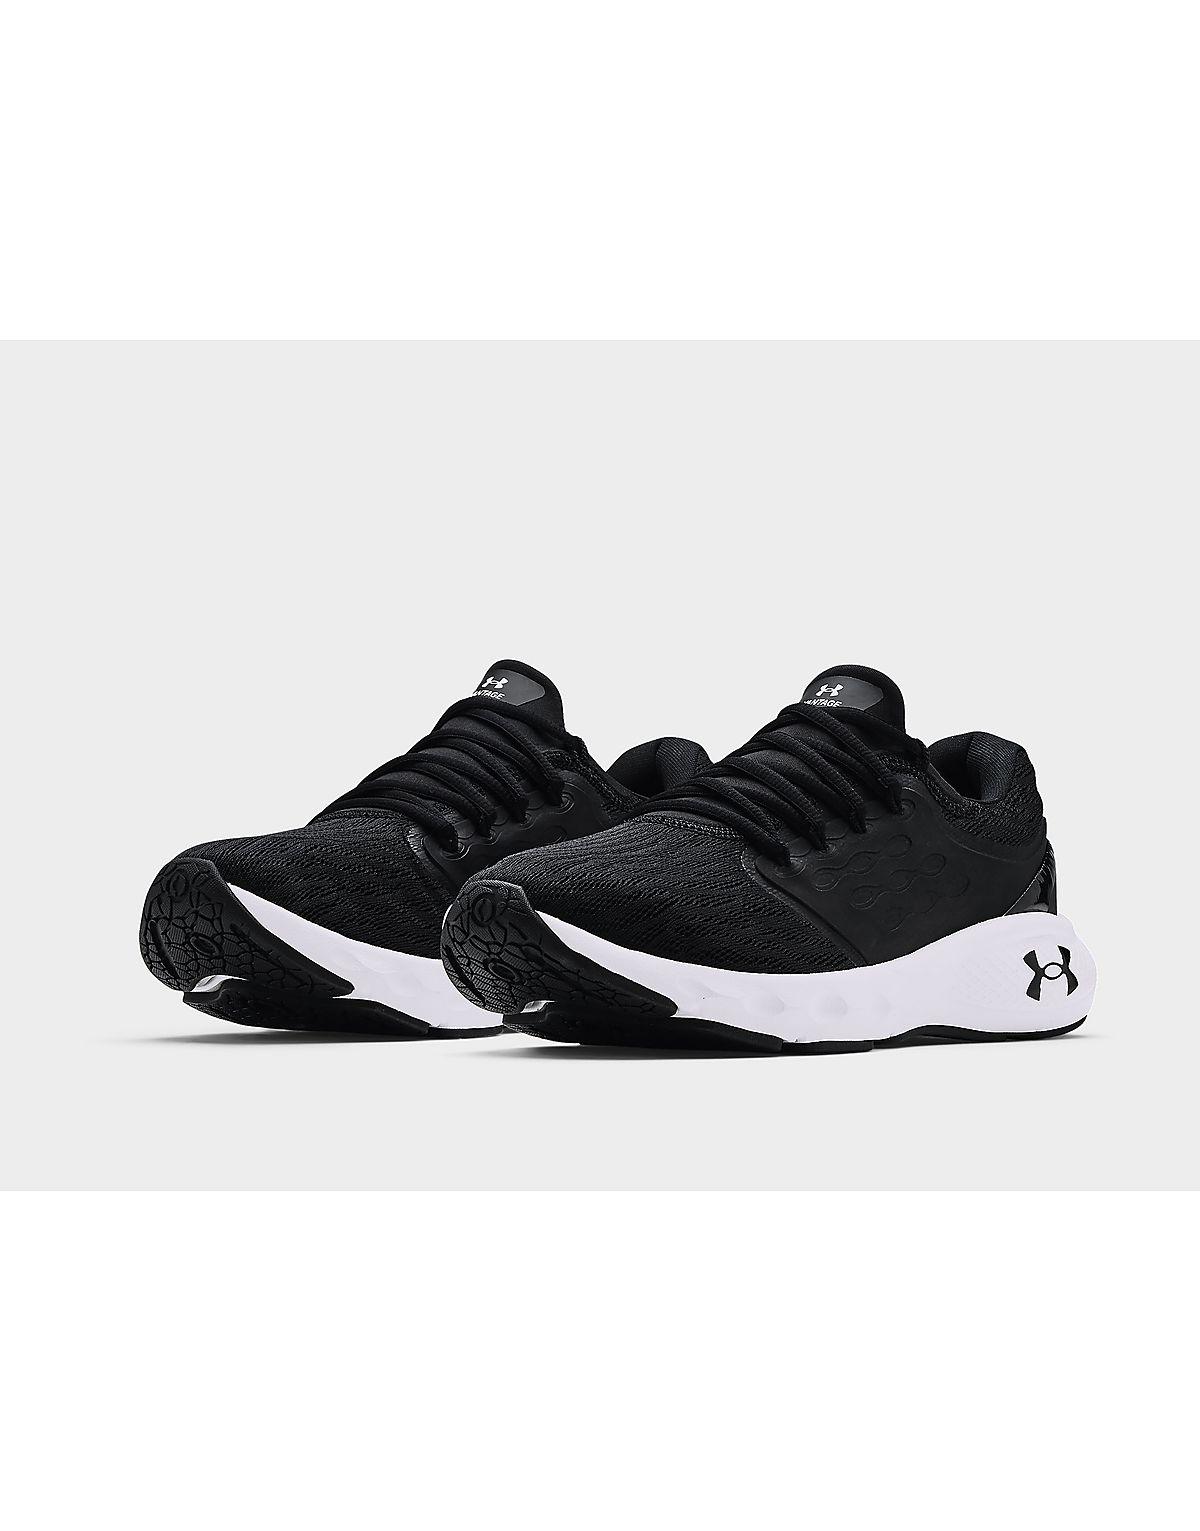 Under Armour Men's Charged Vantage Running Shoe 